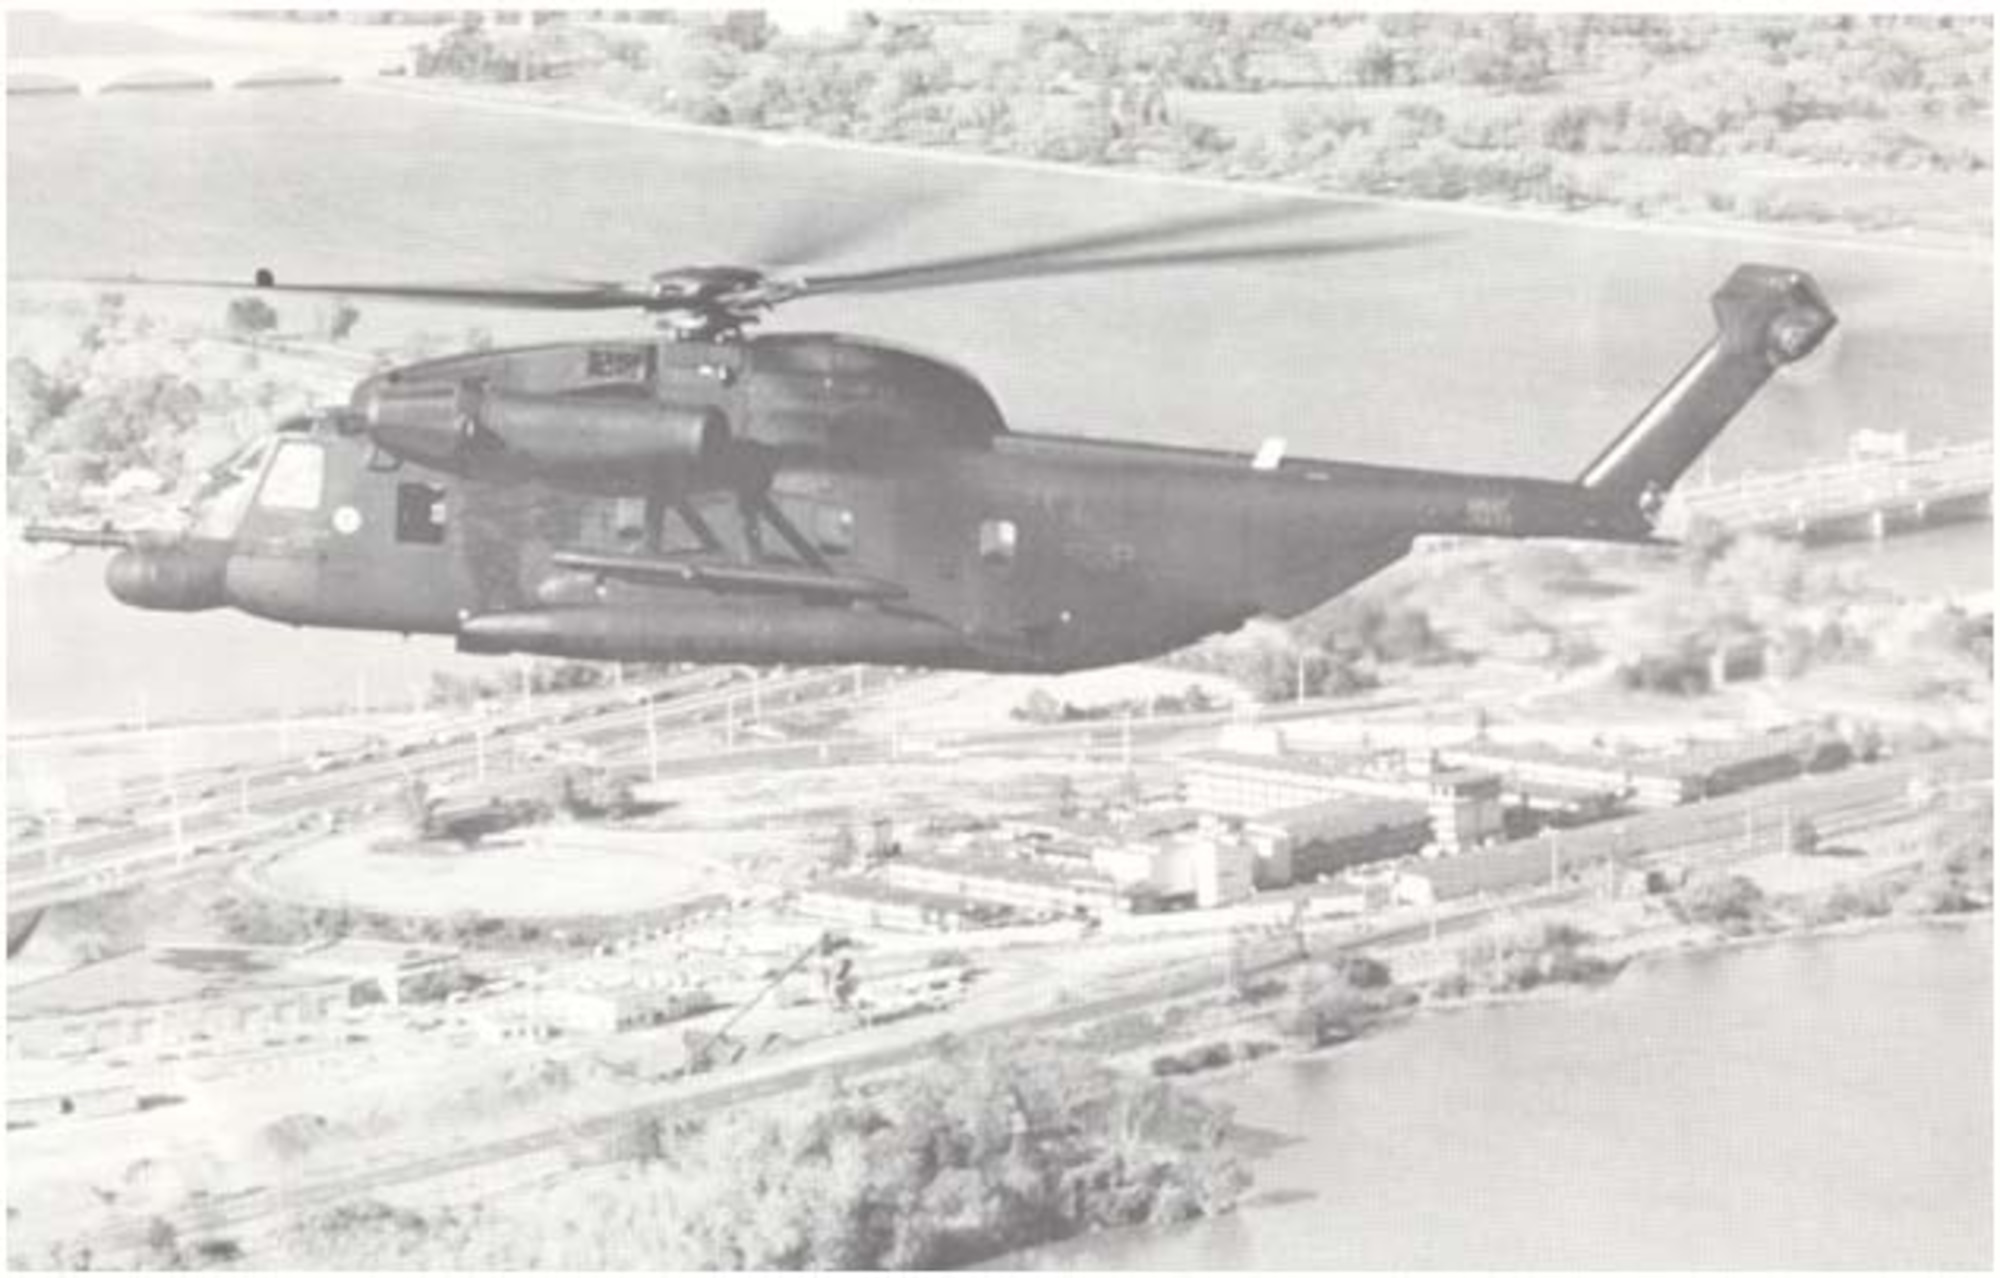 Helicopter 66-14433 flies over Washington, D.C., in 1975 shortly after its modification to the Pave Low configuration. The aircraft was reassigned to the 1550th Aircrew Training and Test Wing at Kirtland AFB in January 1976. USAF photo by Staff Sgt. Robert Kay.